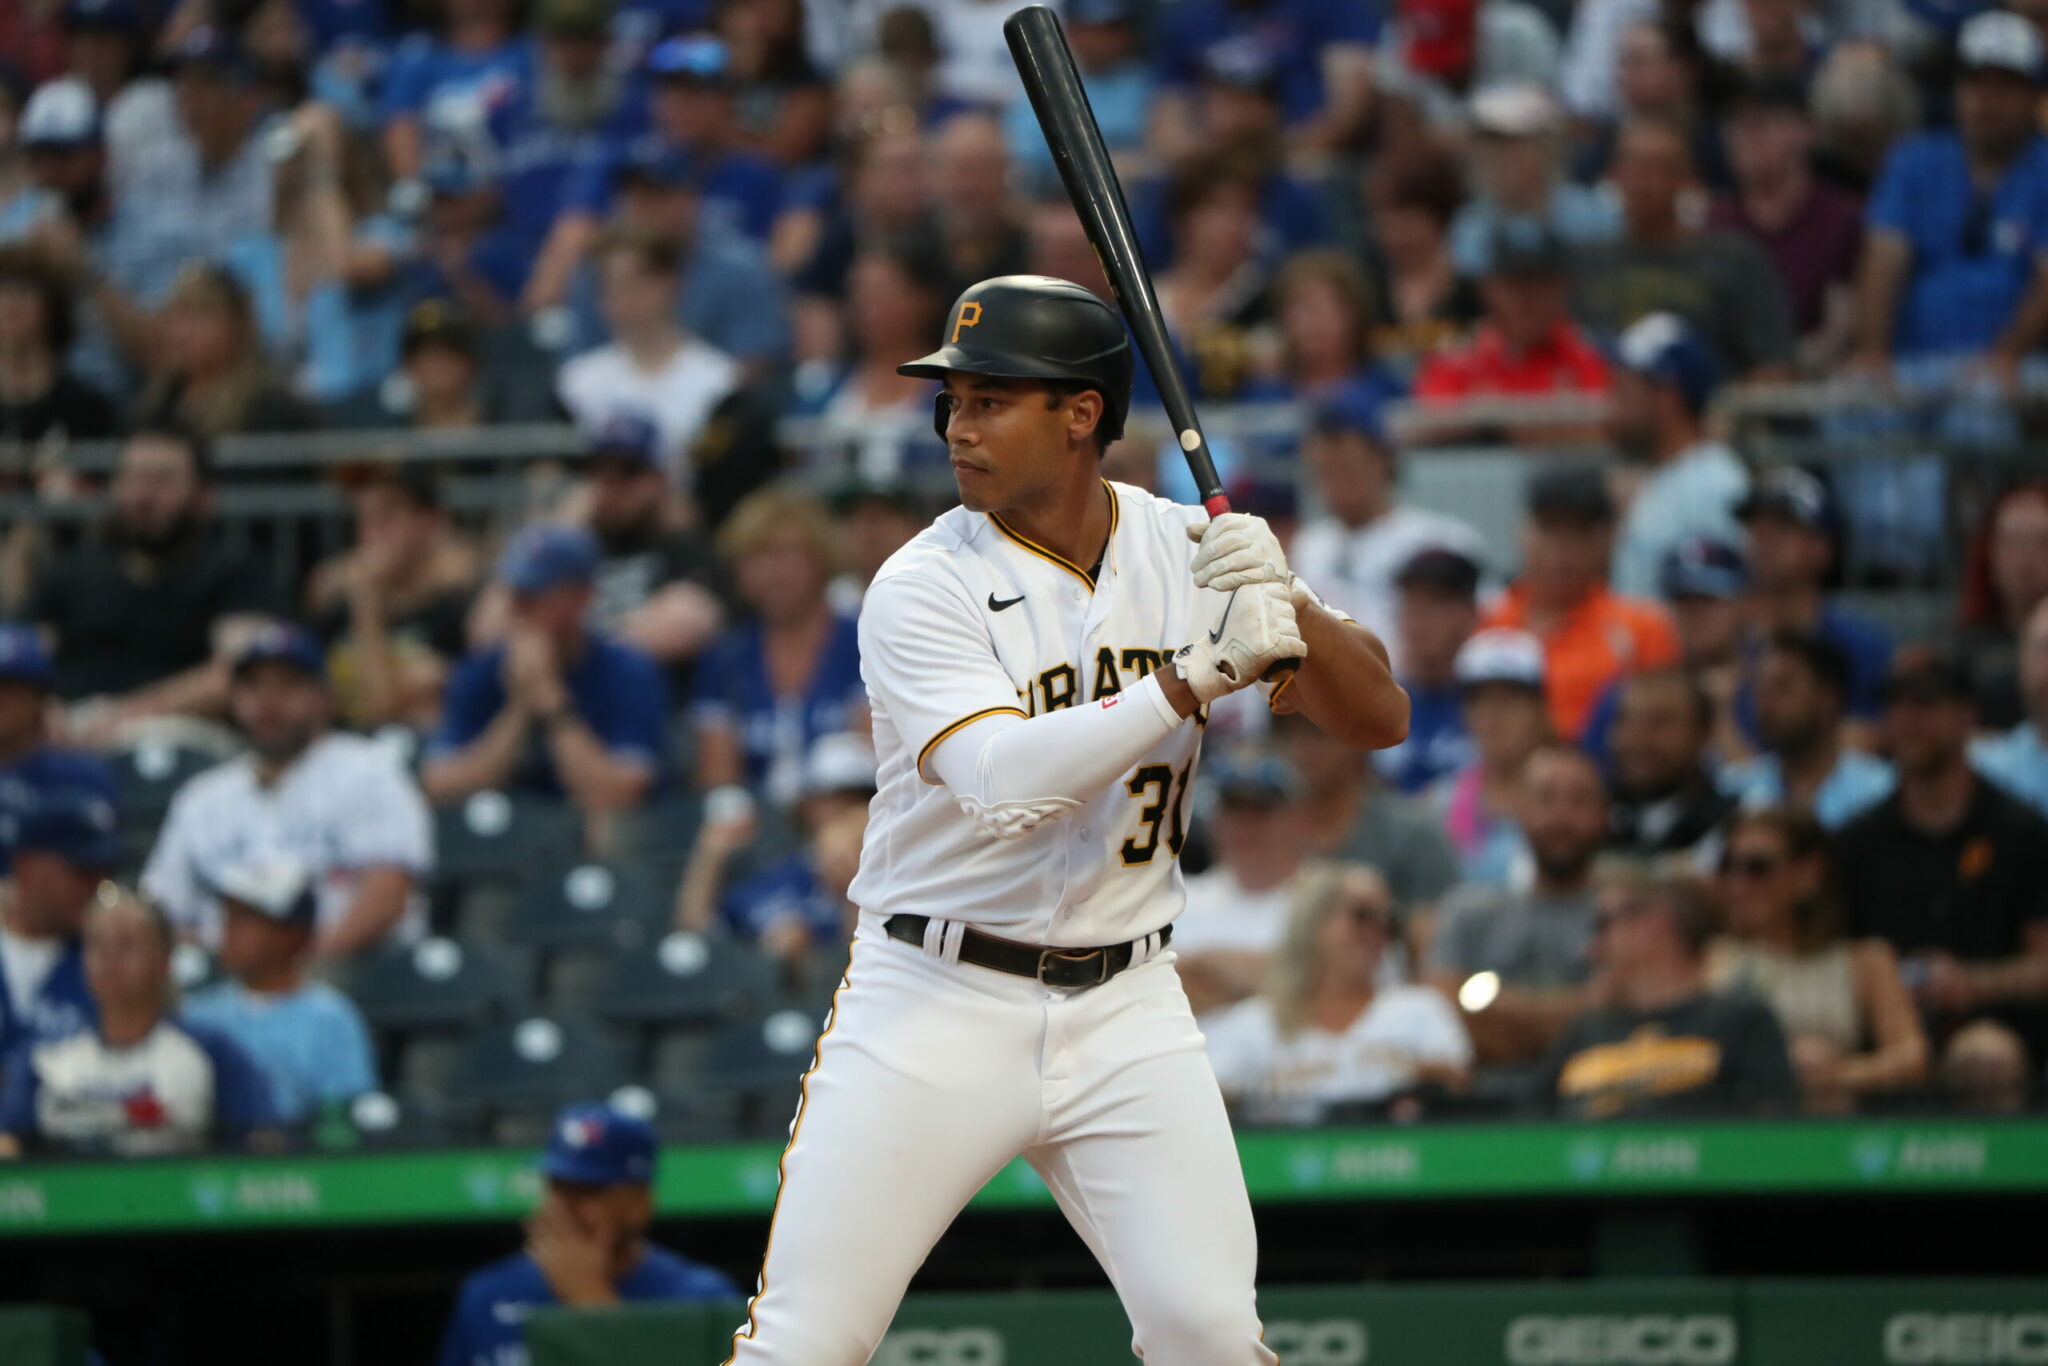 WTM: Projecting the Pirates’ Possible Position Players at the End of 2023